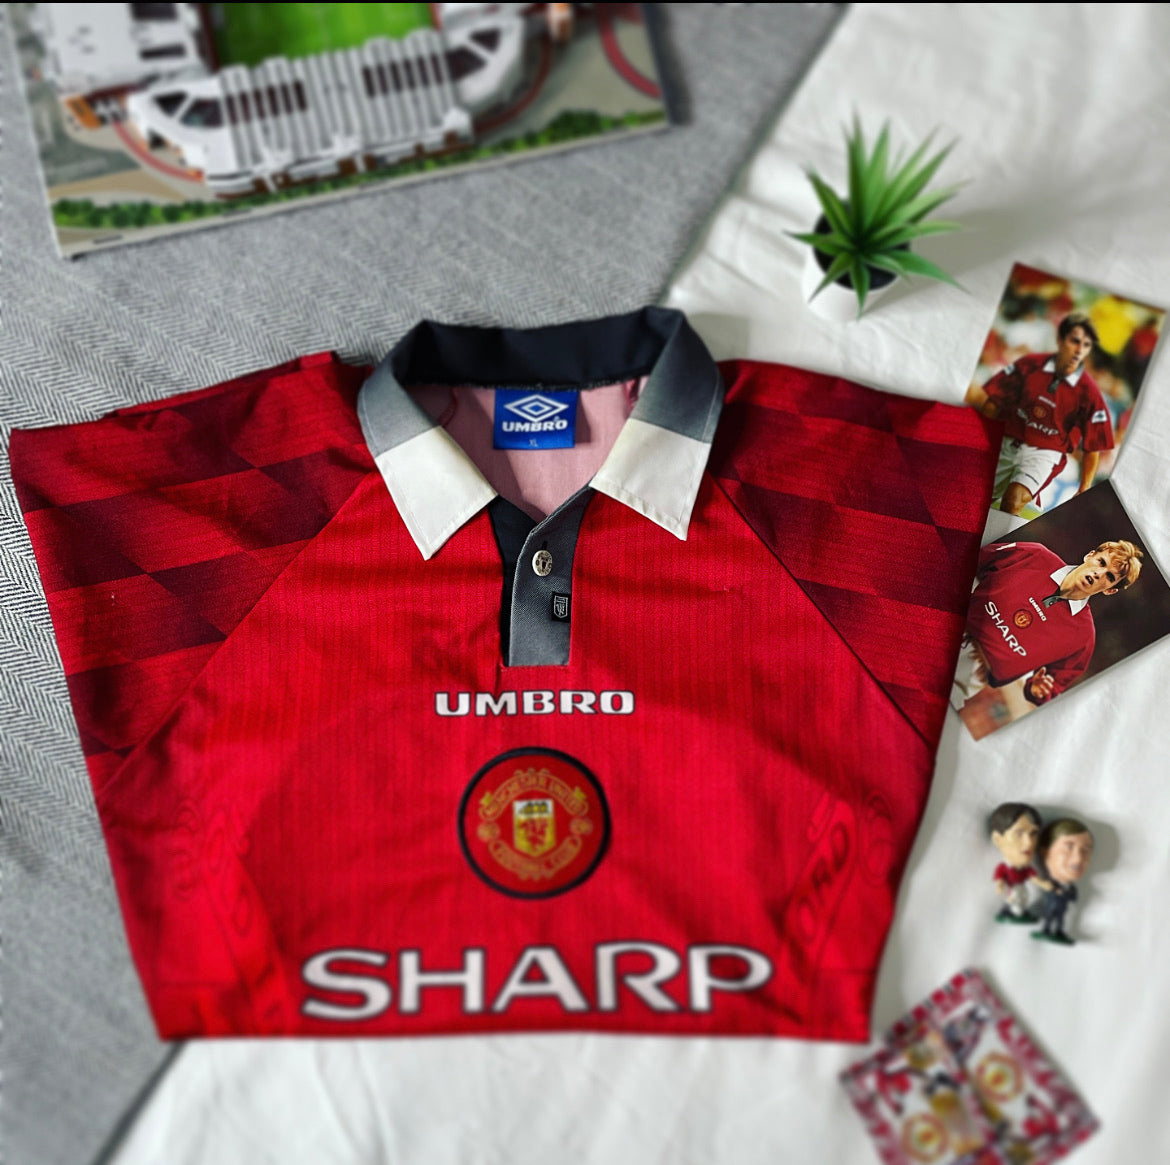 1996-98 Manchester United Home Shirt | Very Good | L